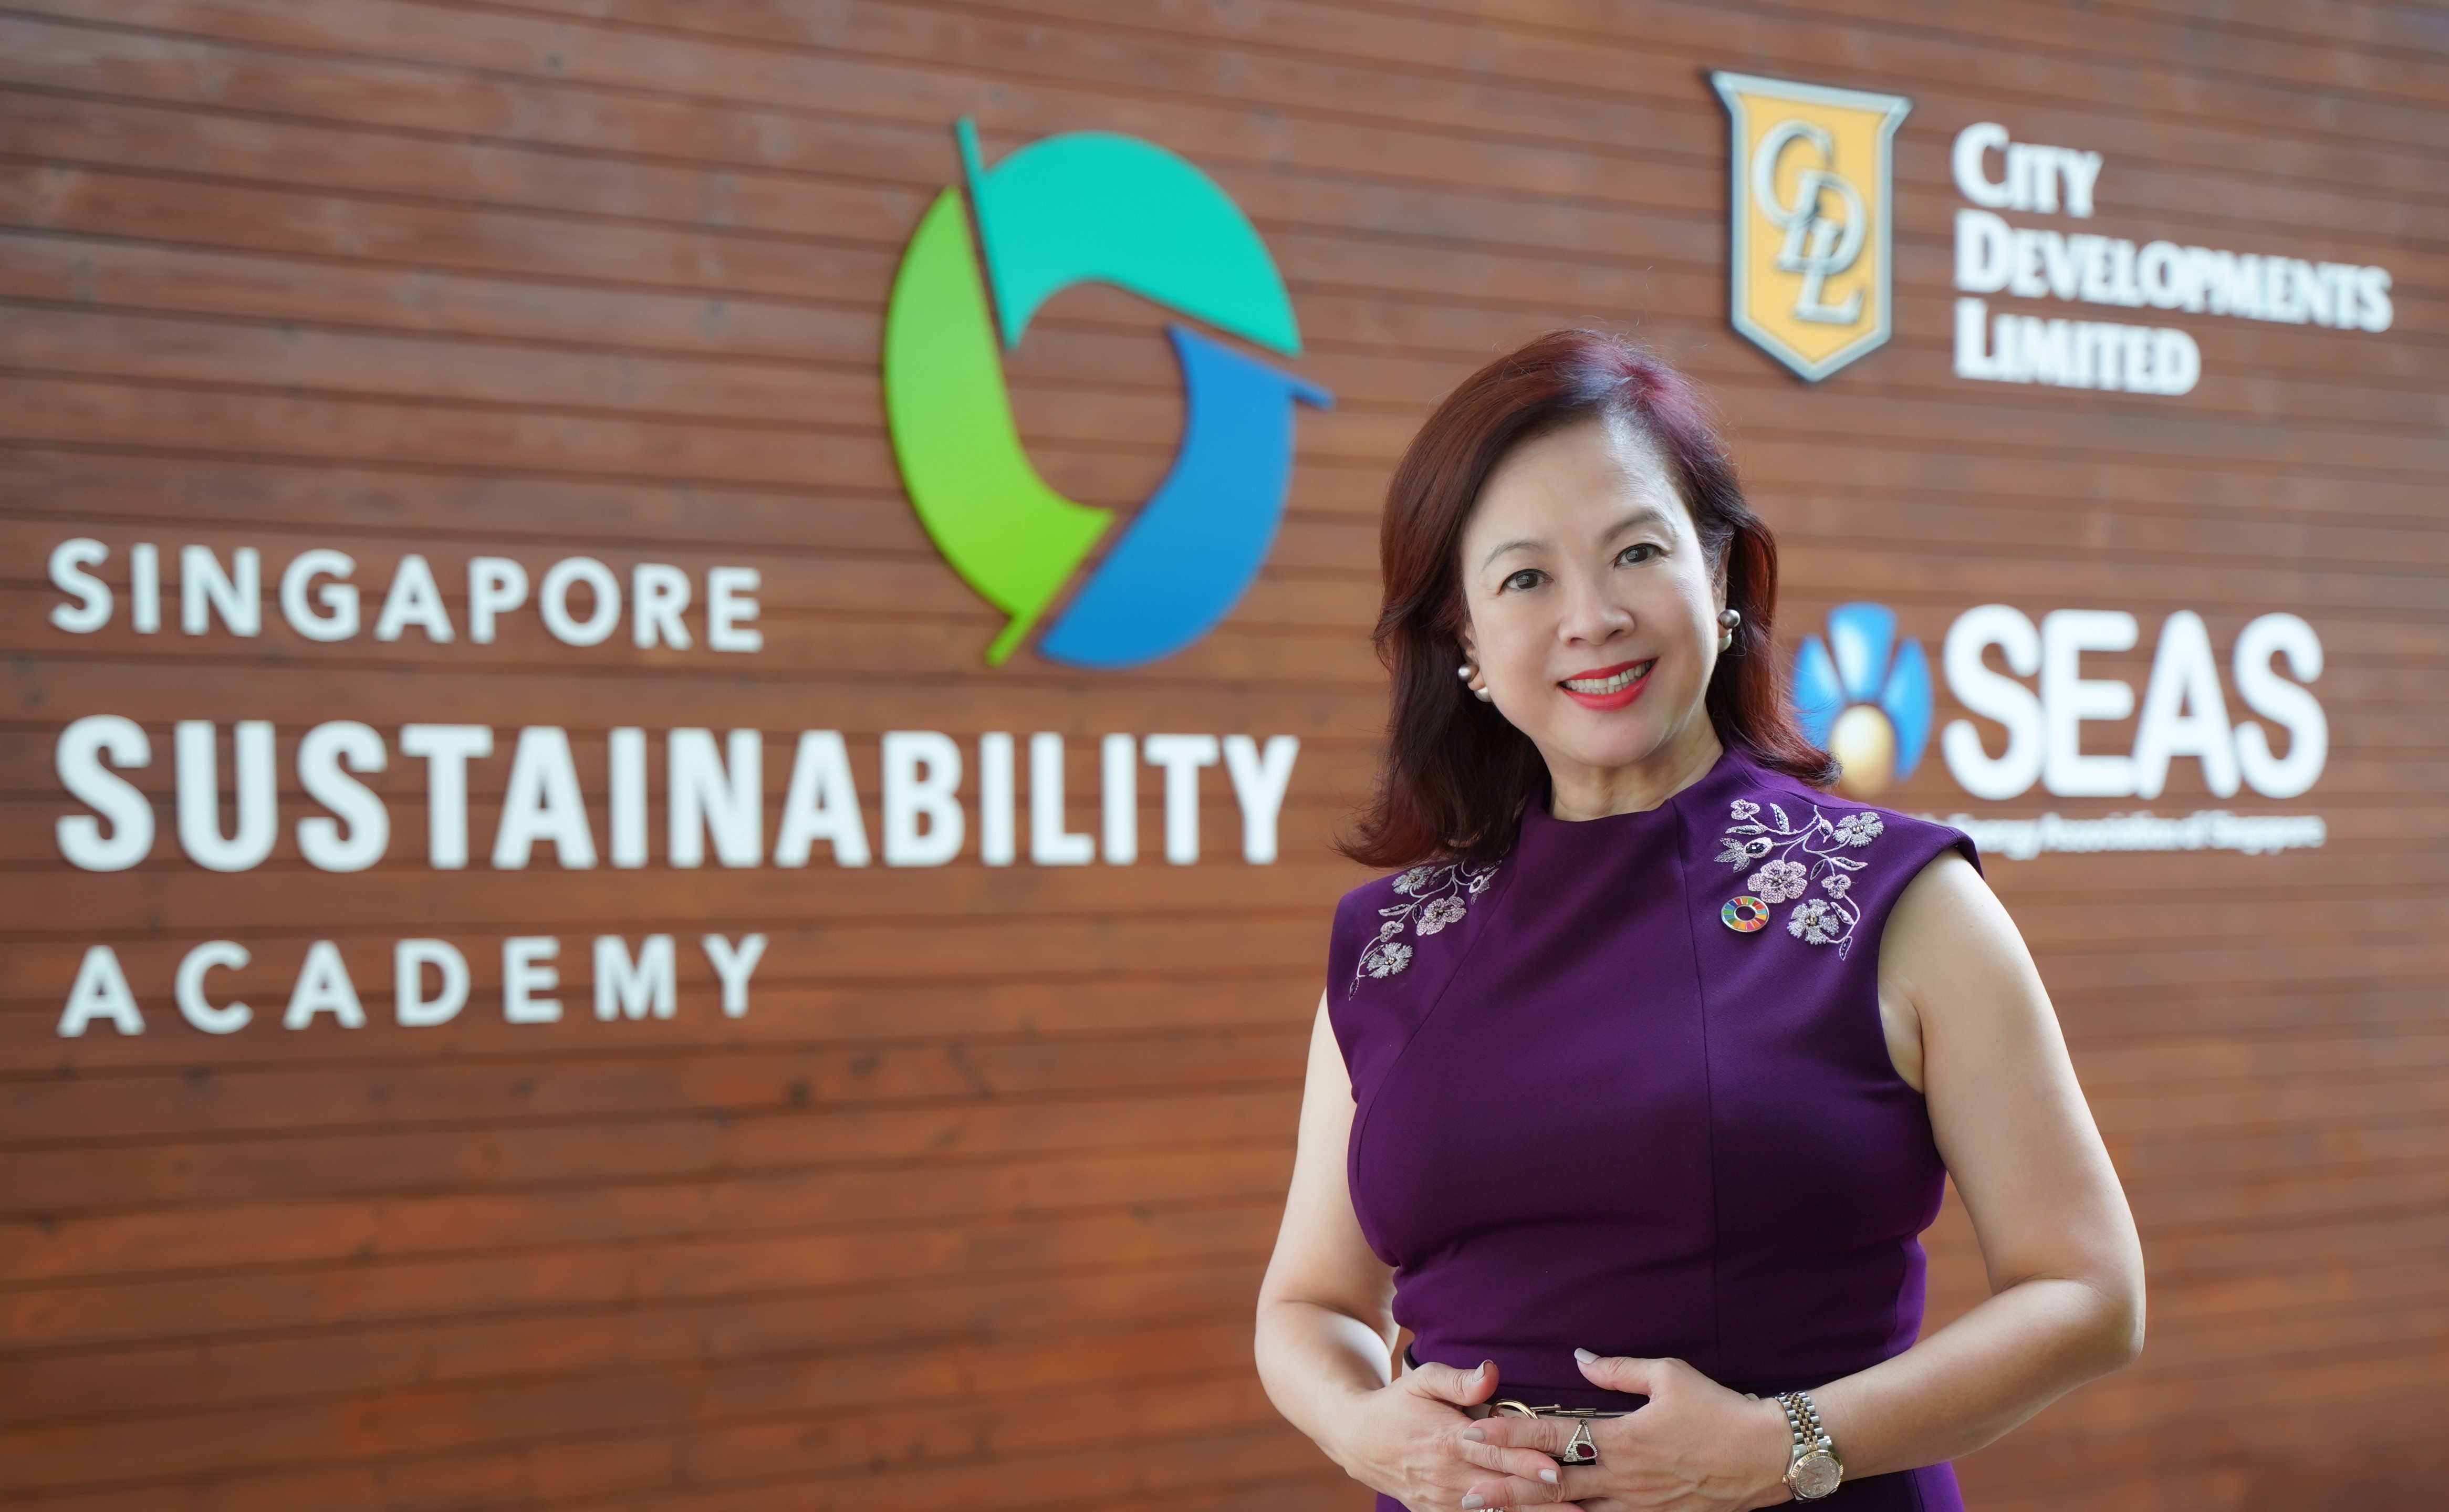 Esther An is chief sustainability officer at Singapore-based City Developments Ltd